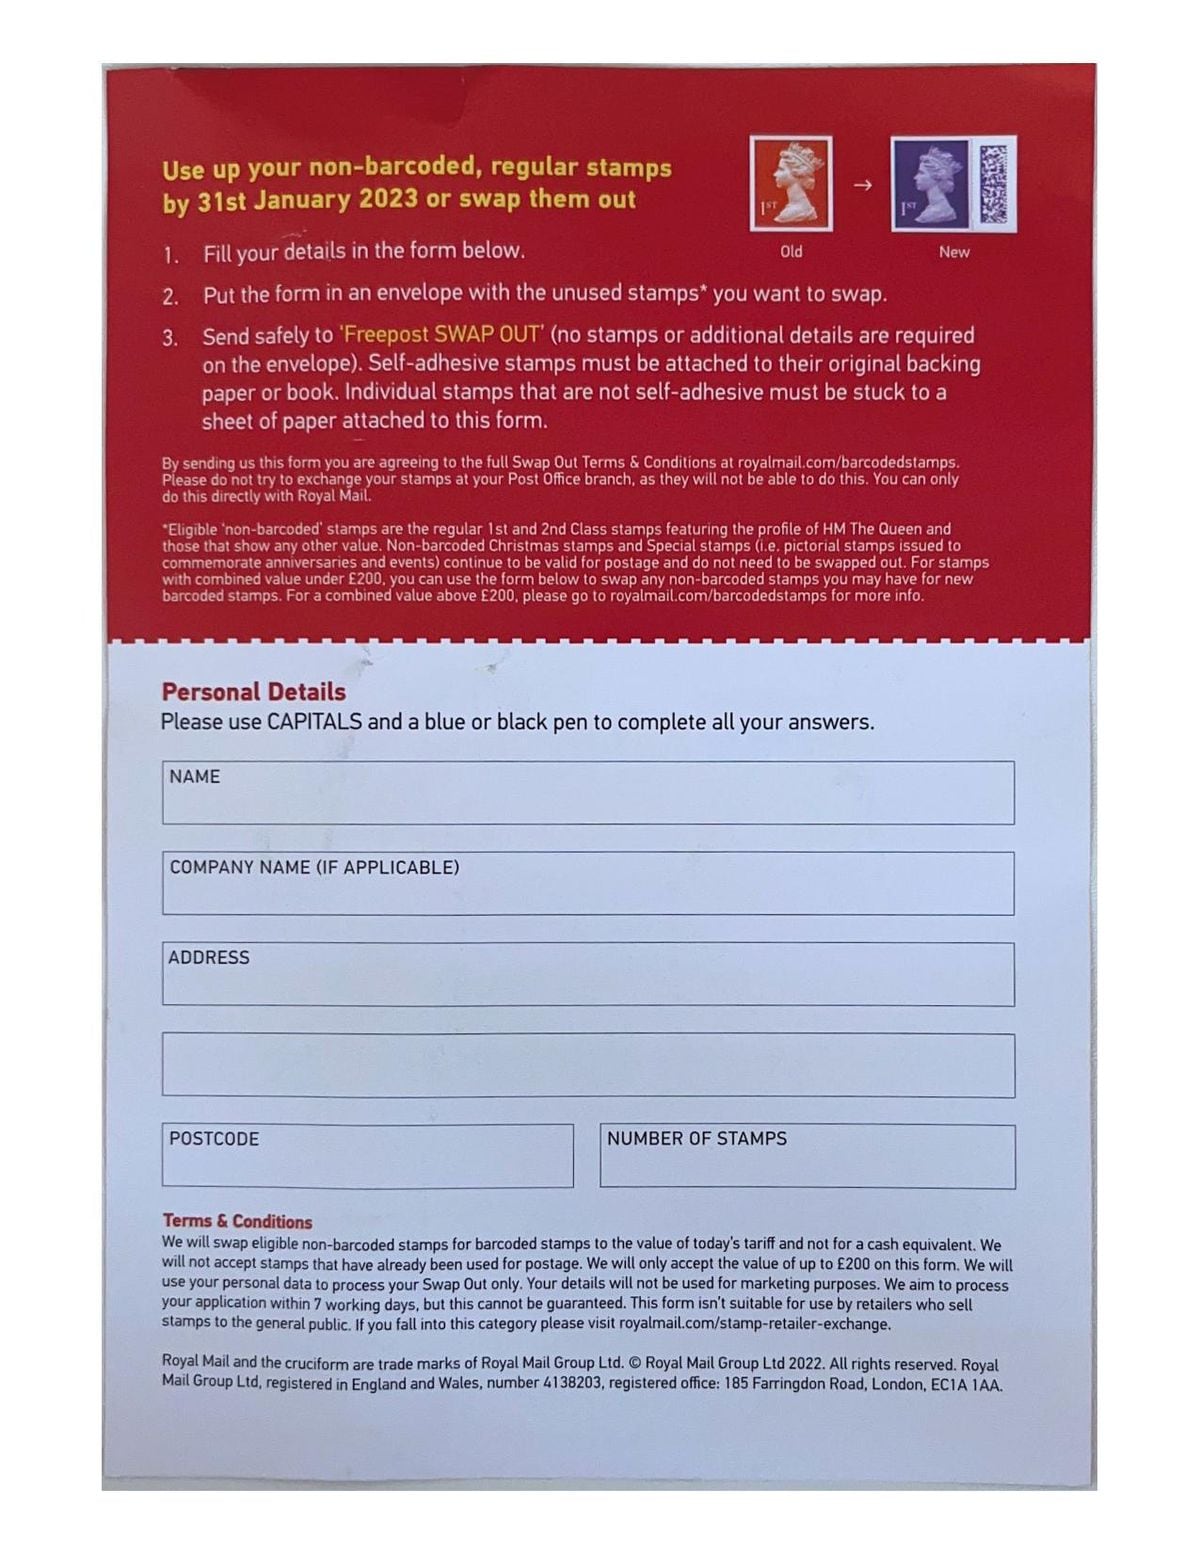 The leaflet contains a form so people can send in their old stamps to swap them for new ones with barcodes